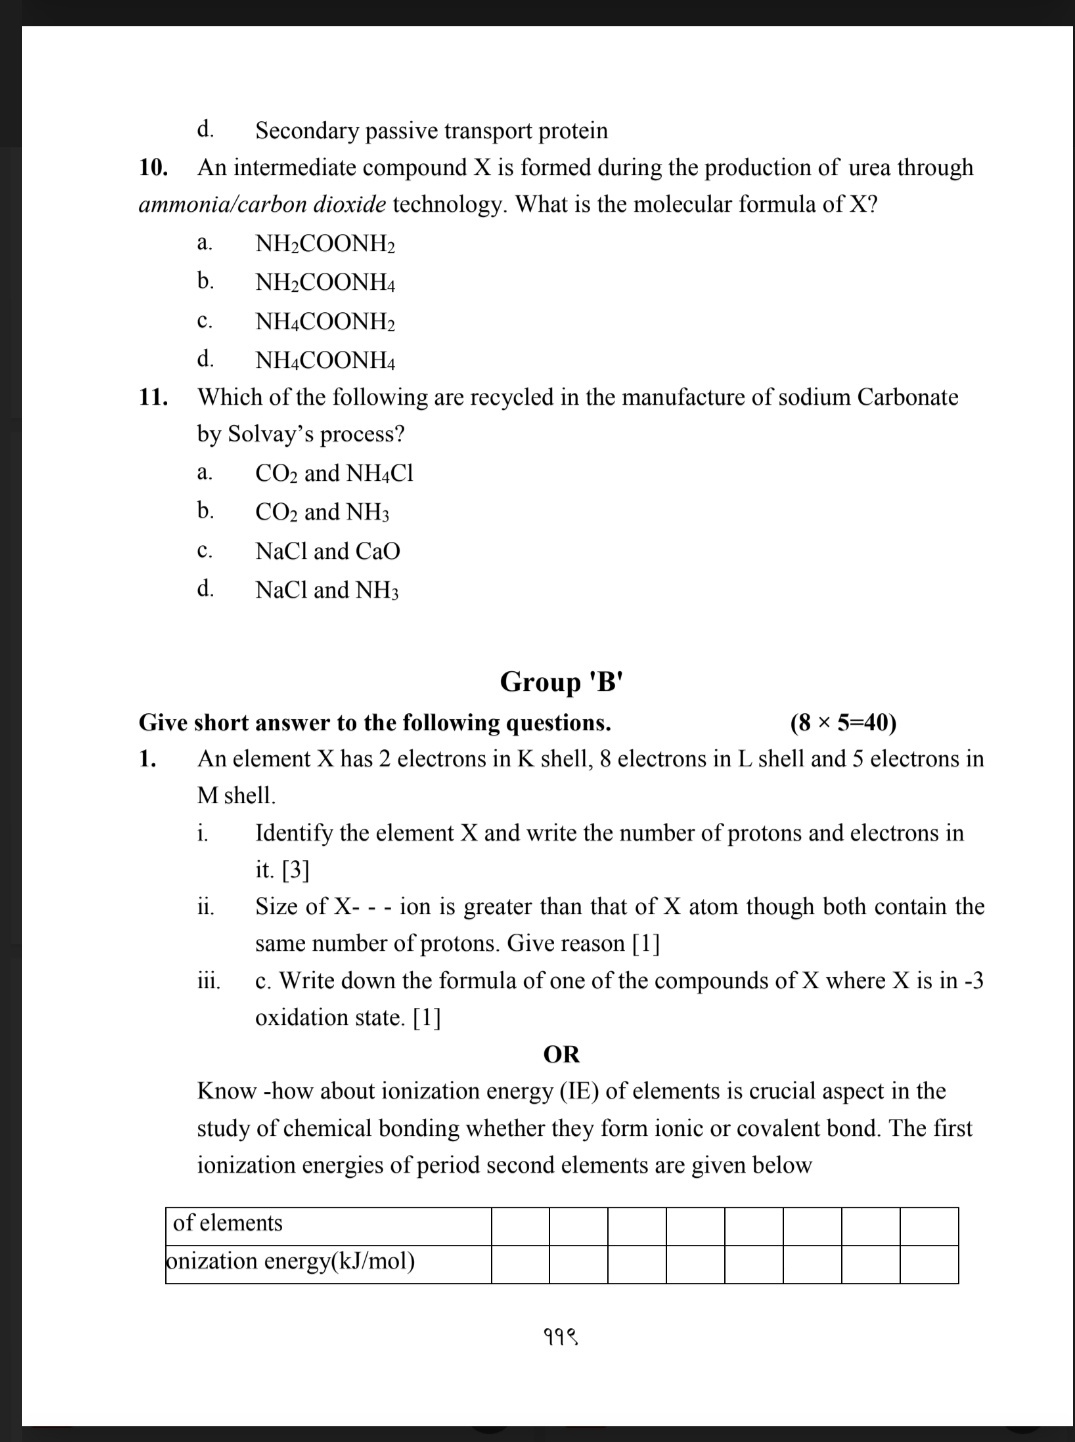 Class 11 Chemistry model question paper with Solution.